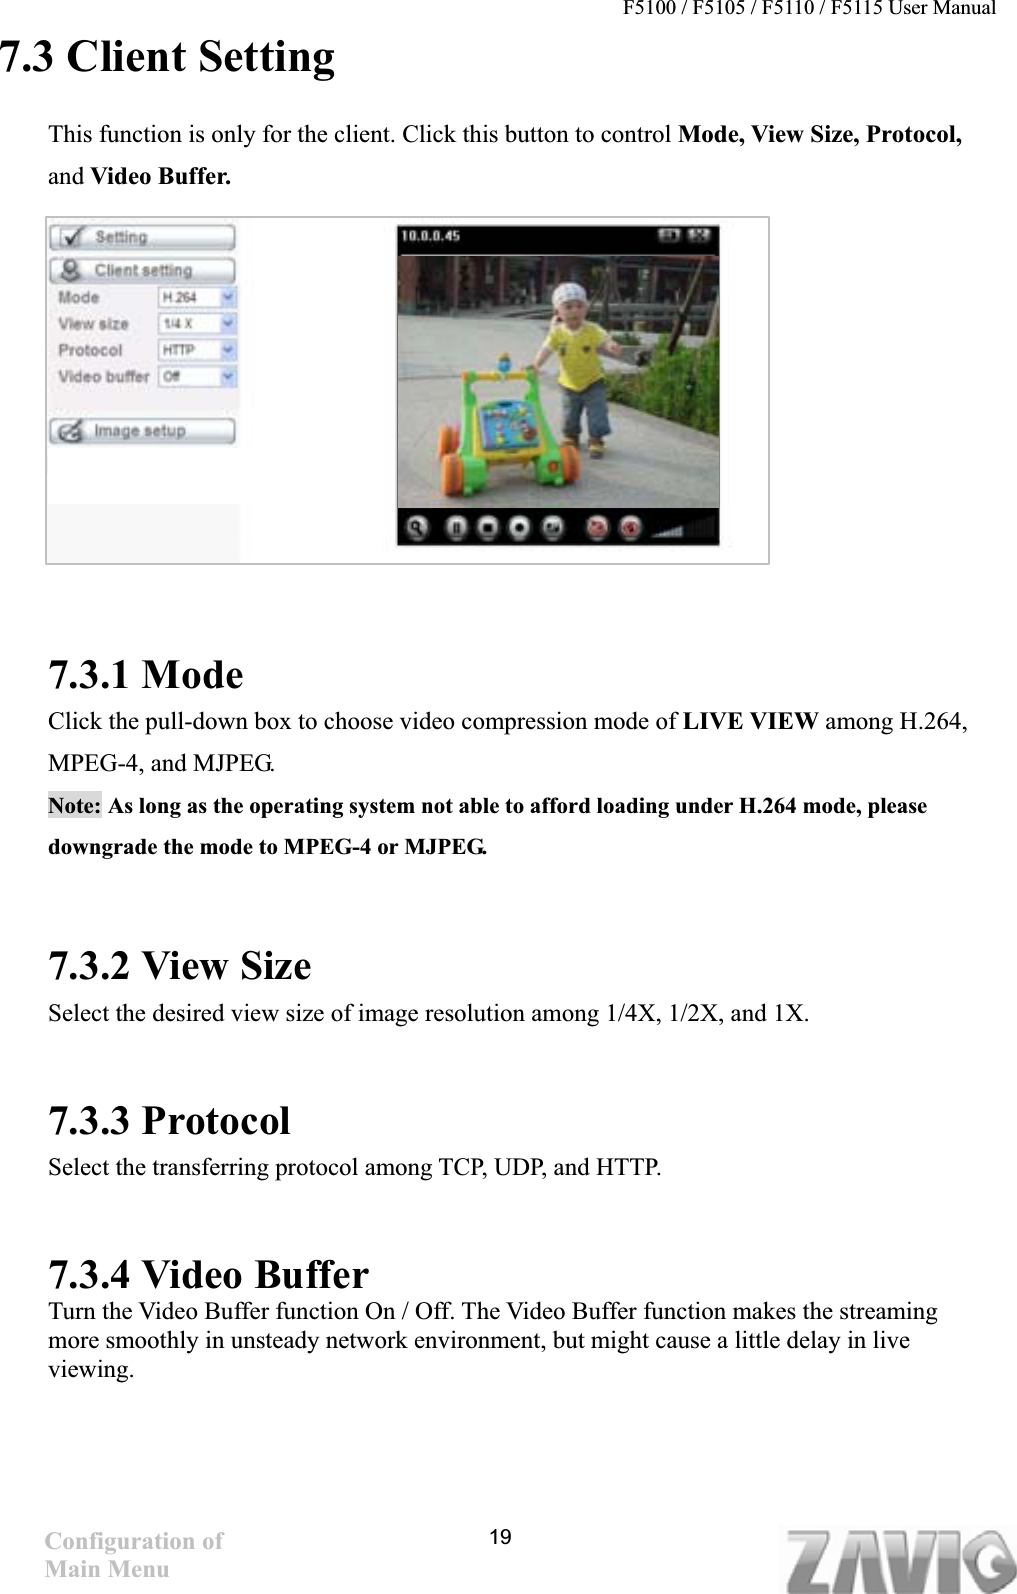 F5100 / F5105 / F5110 / F5115 User Manual   7.3 Client Setting This function is only for the client. Click this button to control Mode, View Size, Protocol, and Video Buffer. 7.3.1 Mode Click the pull-down box to choose video compression mode of LIVE VIEW among H.264, MPEG-4, and MJPEG.   Note: As long as the operating system not able to afford loading under H.264 mode, please downgrade the mode to MPEG-4 or MJPEG.     7.3.2 View Size Select the desired view size of image resolution among 1/4X, 1/2X, and 1X.7.3.3 Protocol Select the transferring protocol among TCP, UDP, and HTTP.     7.3.4 Video Buffer   Turn the Video Buffer function On / Off. The Video Buffer function makes the streaming more smoothly in unsteady network environment, but might cause a little delay in live viewing.Configuration of Main Menu 19